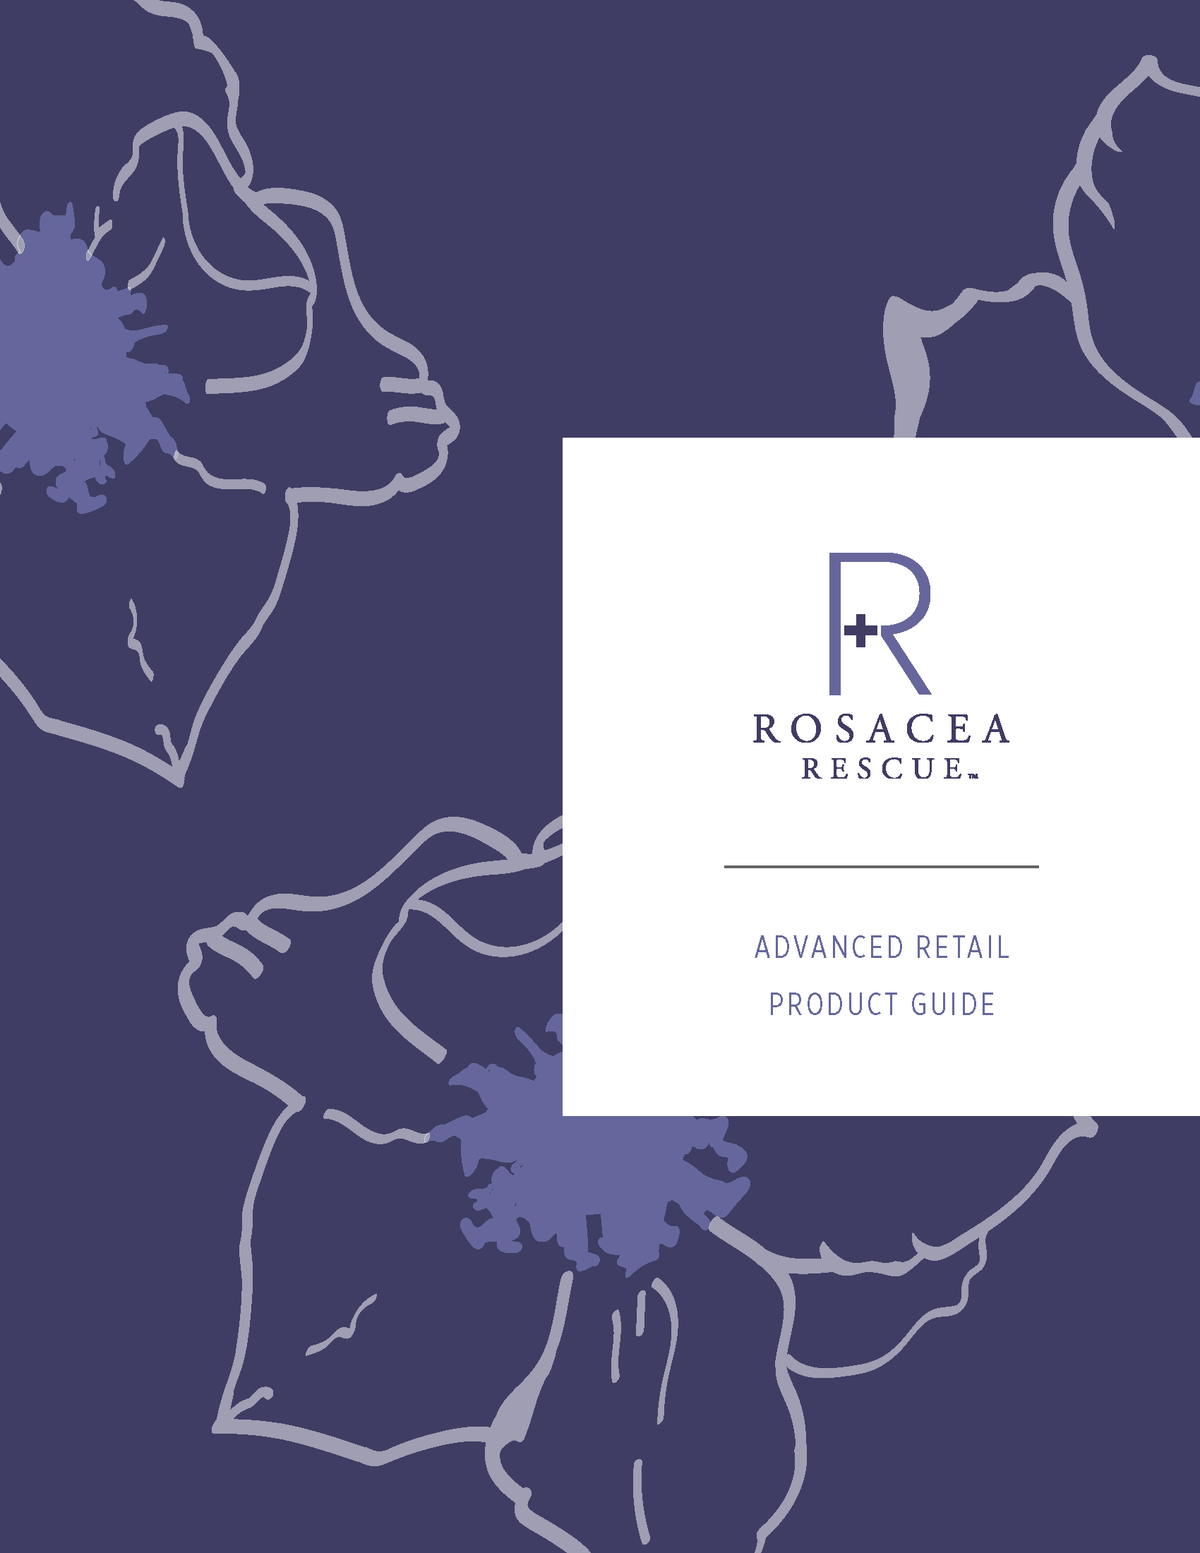 Rosacea Rescue - Advanced Retail Product Guide